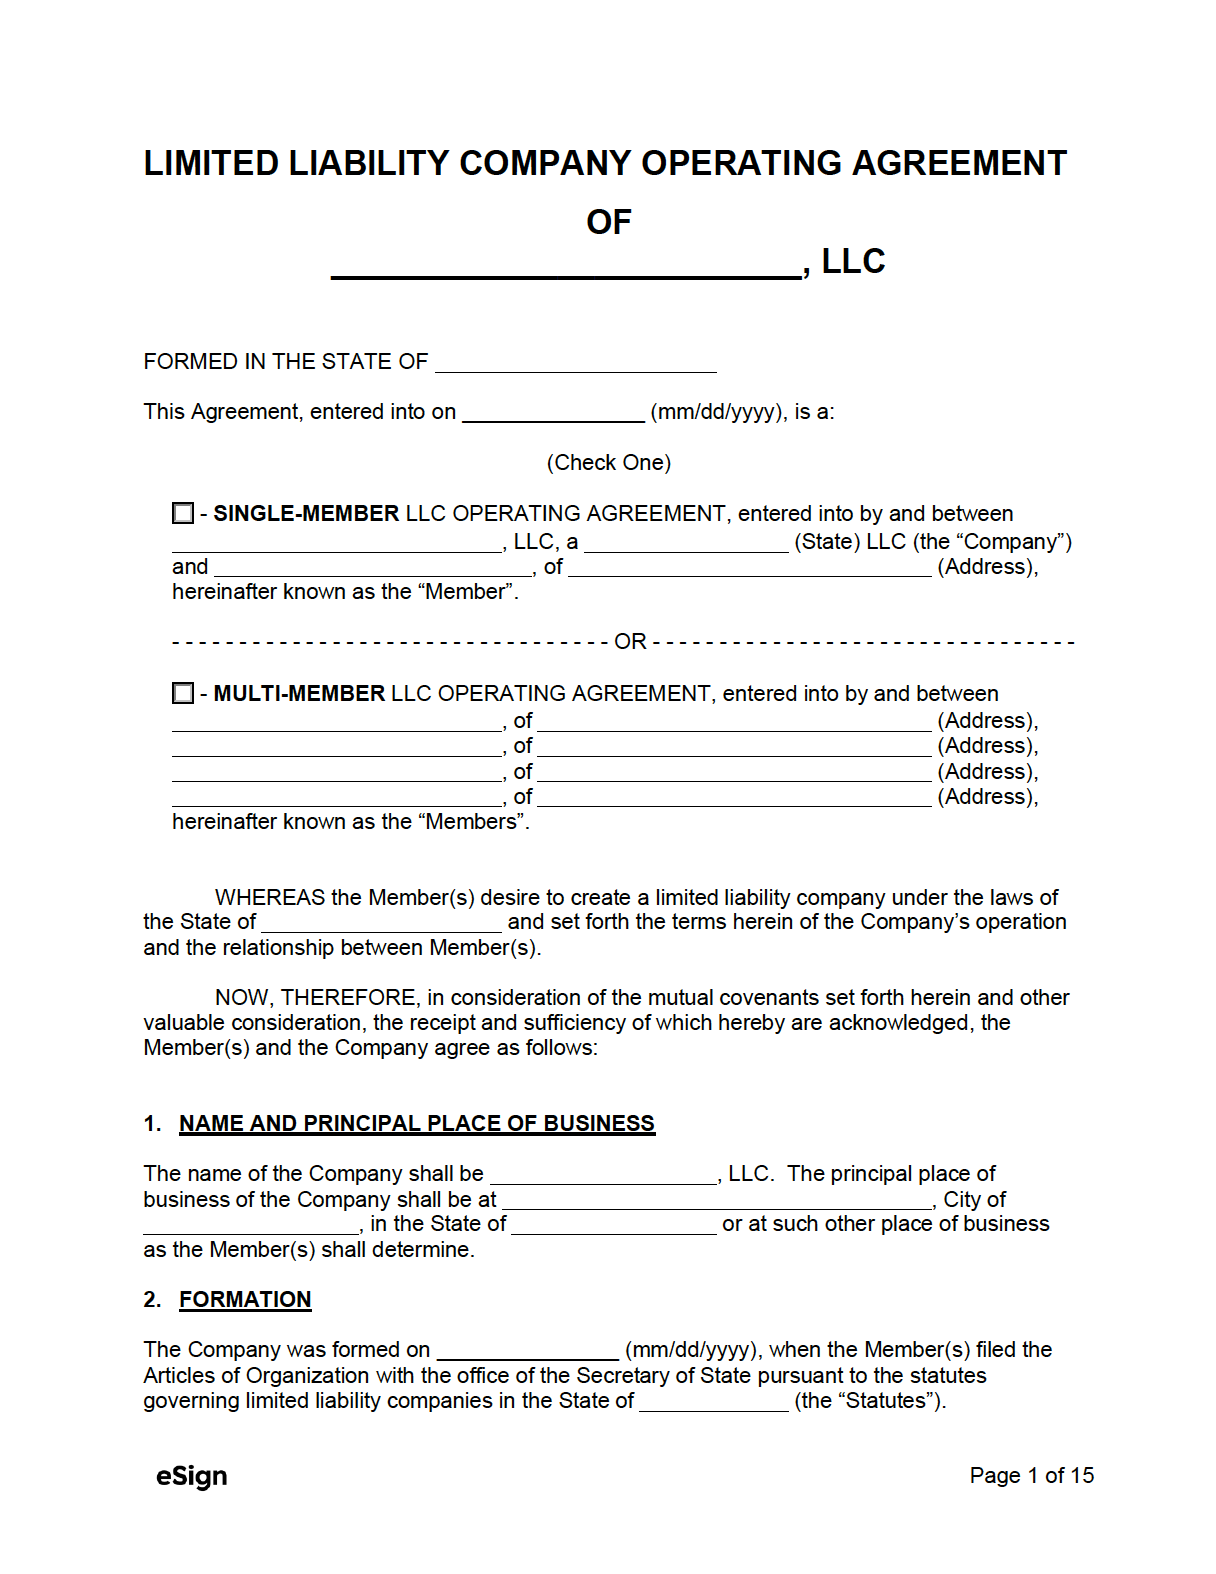 llc without operating agreement